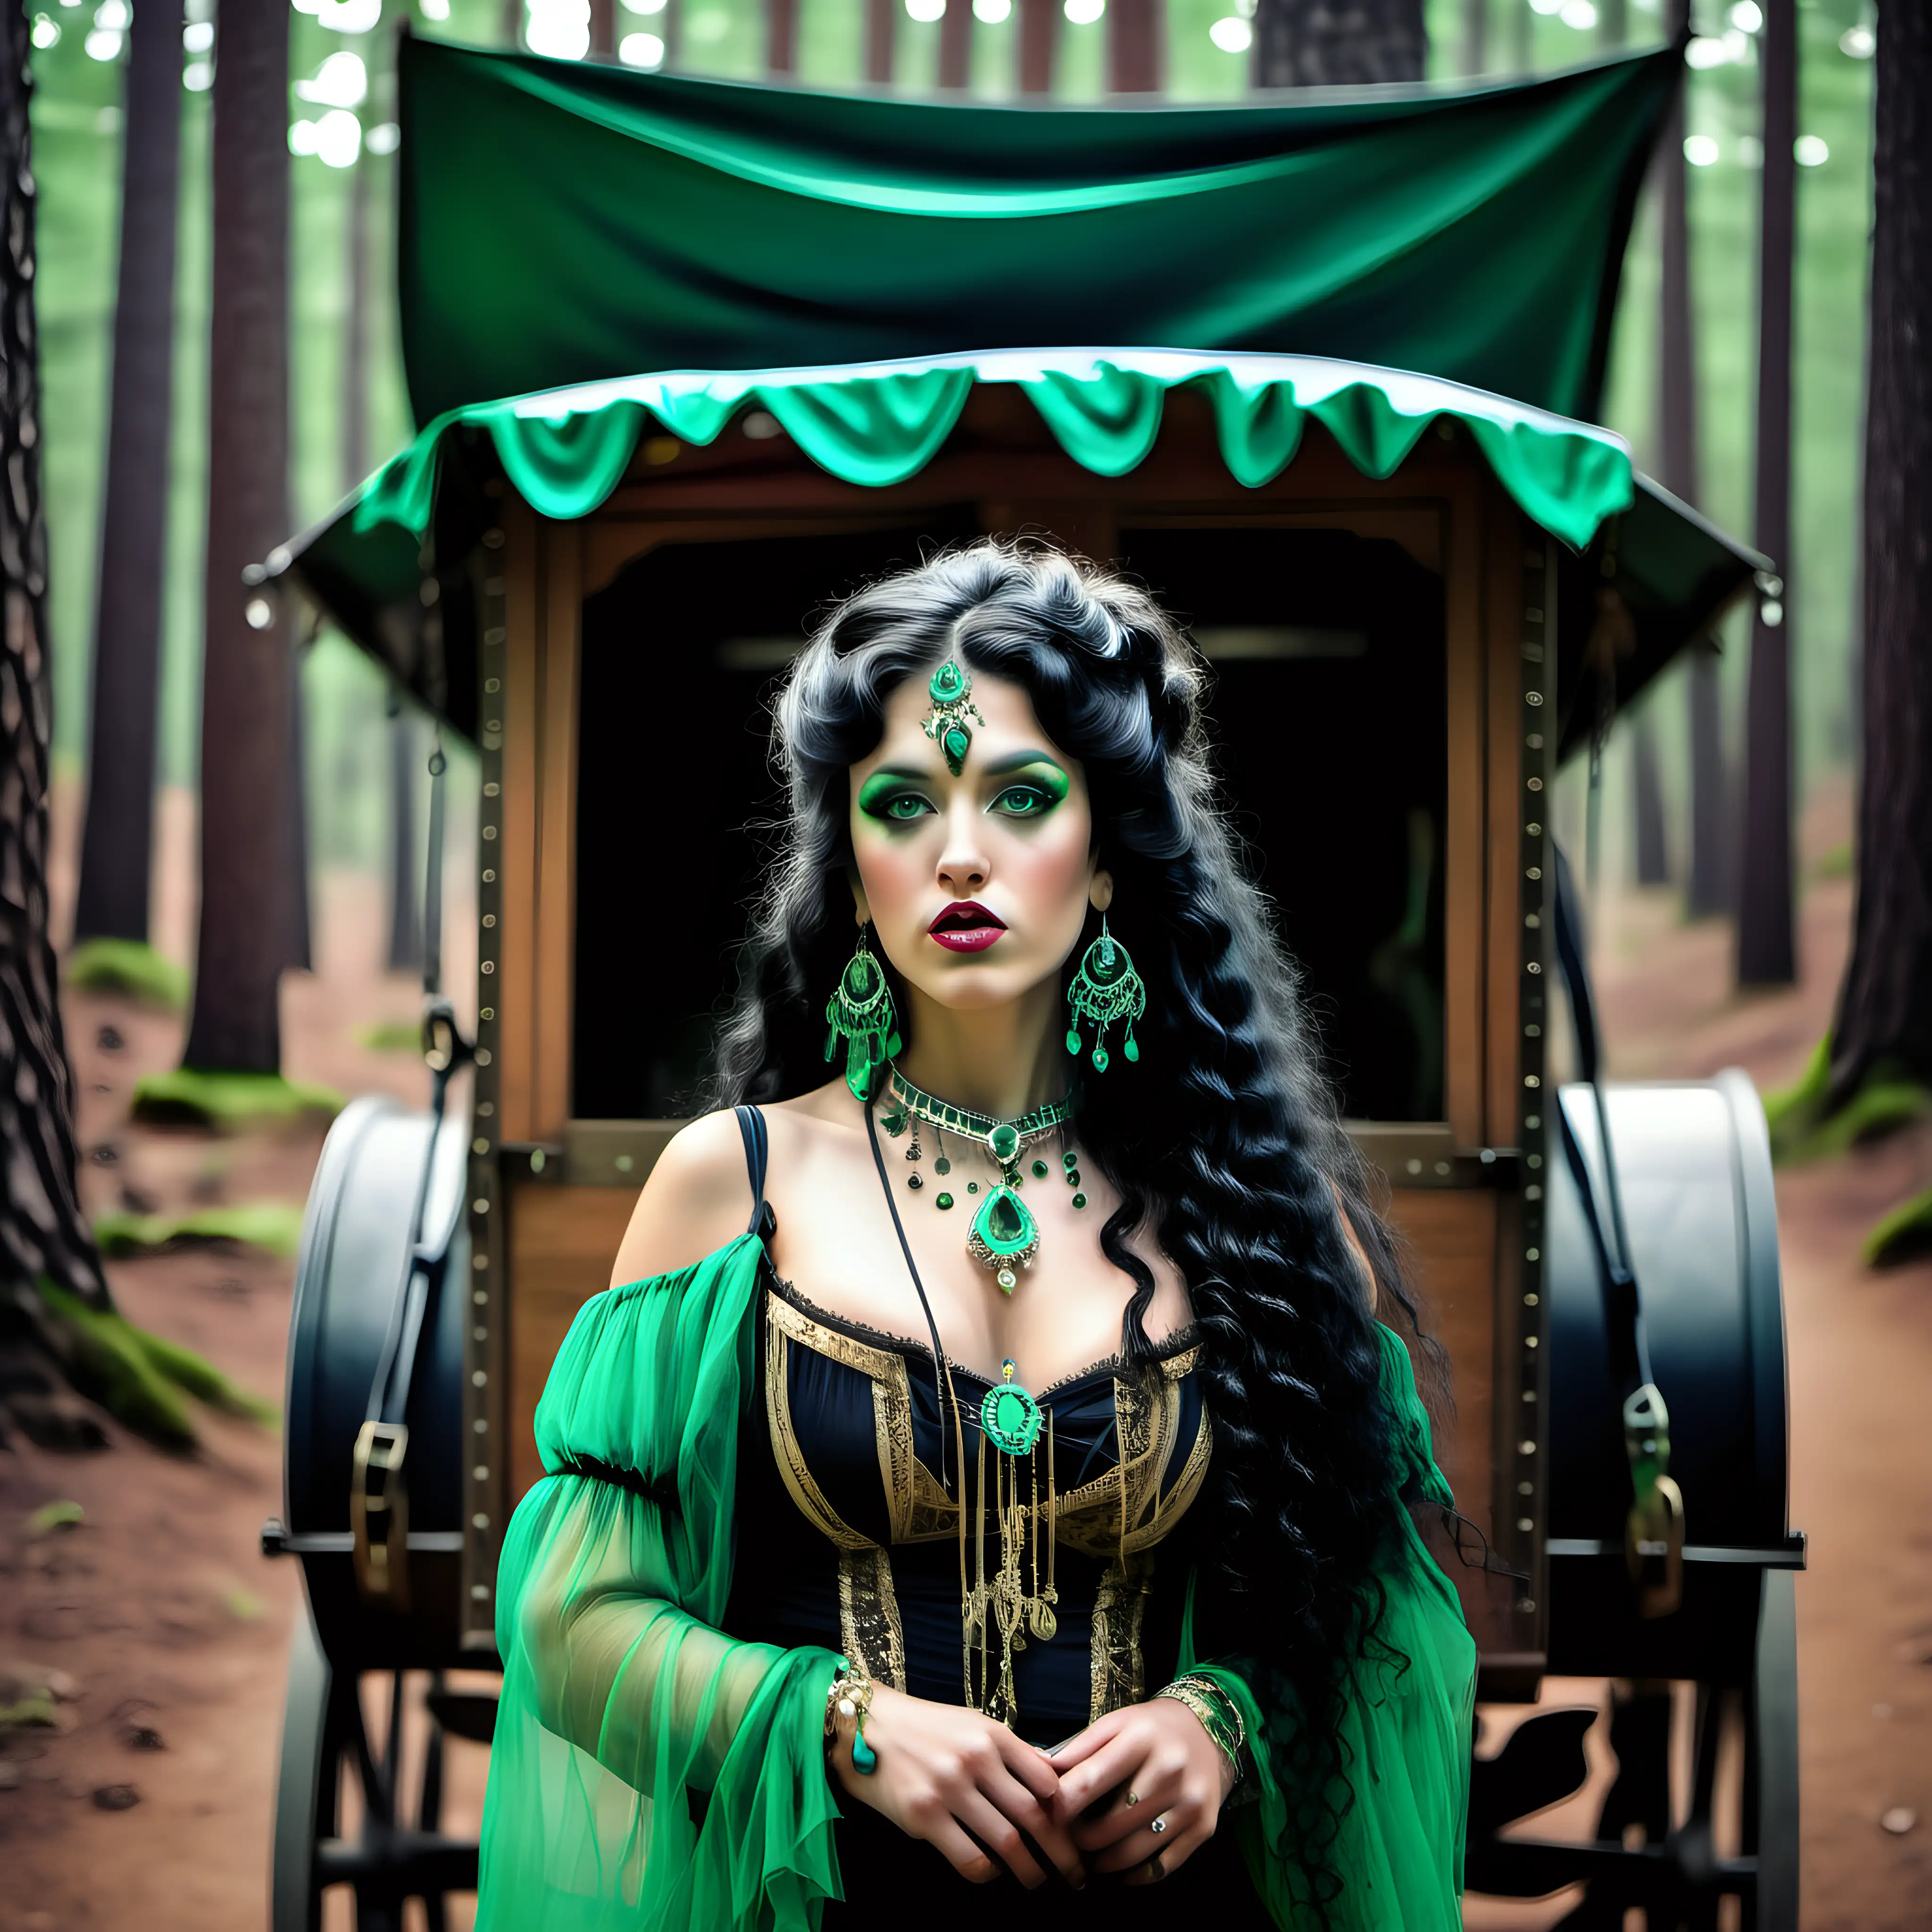 a gypsy wagon is in the pine forest with gypsy horses, gypsy woman with long black curly hair with green eyes, she has mascara & eyeliner, ,she is wearing emerald earrings & necklace 